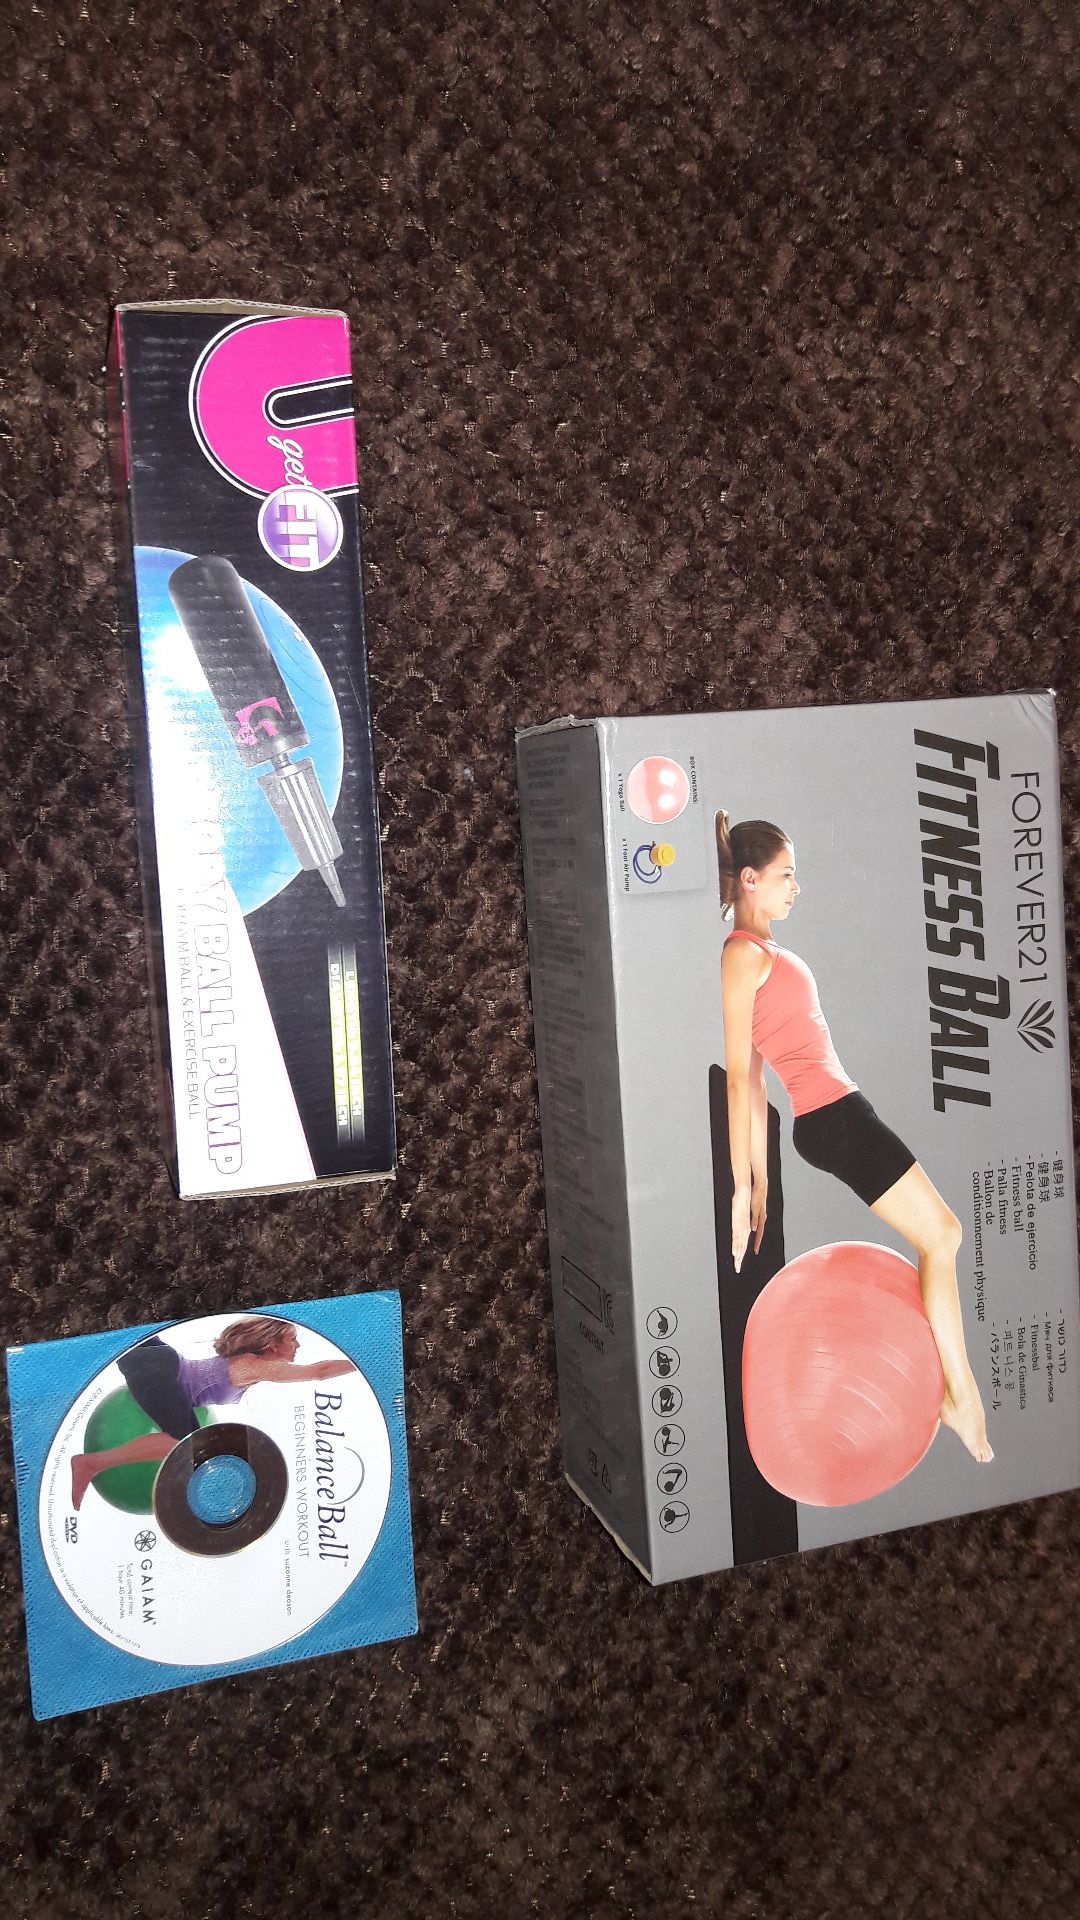 New Complete Fitness Ball Workout kit.